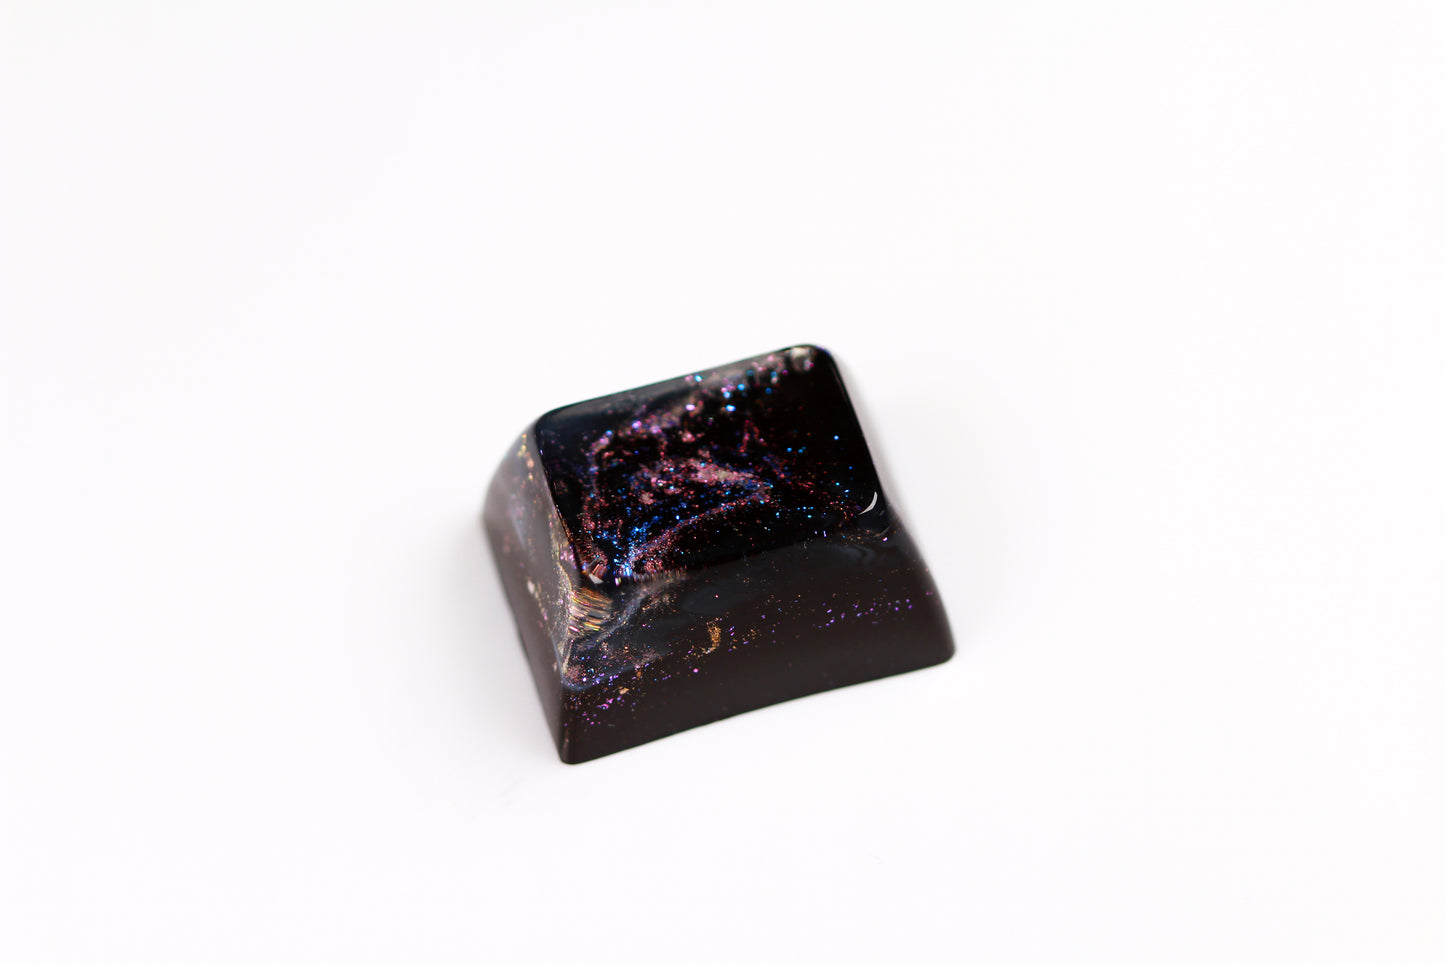 Gimpy SA Row 3, 1.25u - Deep Field Particle Stream 1 - PrimeCaps Keycap - Blank and Sculpted Artisan Keycaps for cherry MX mechanical keyboards 